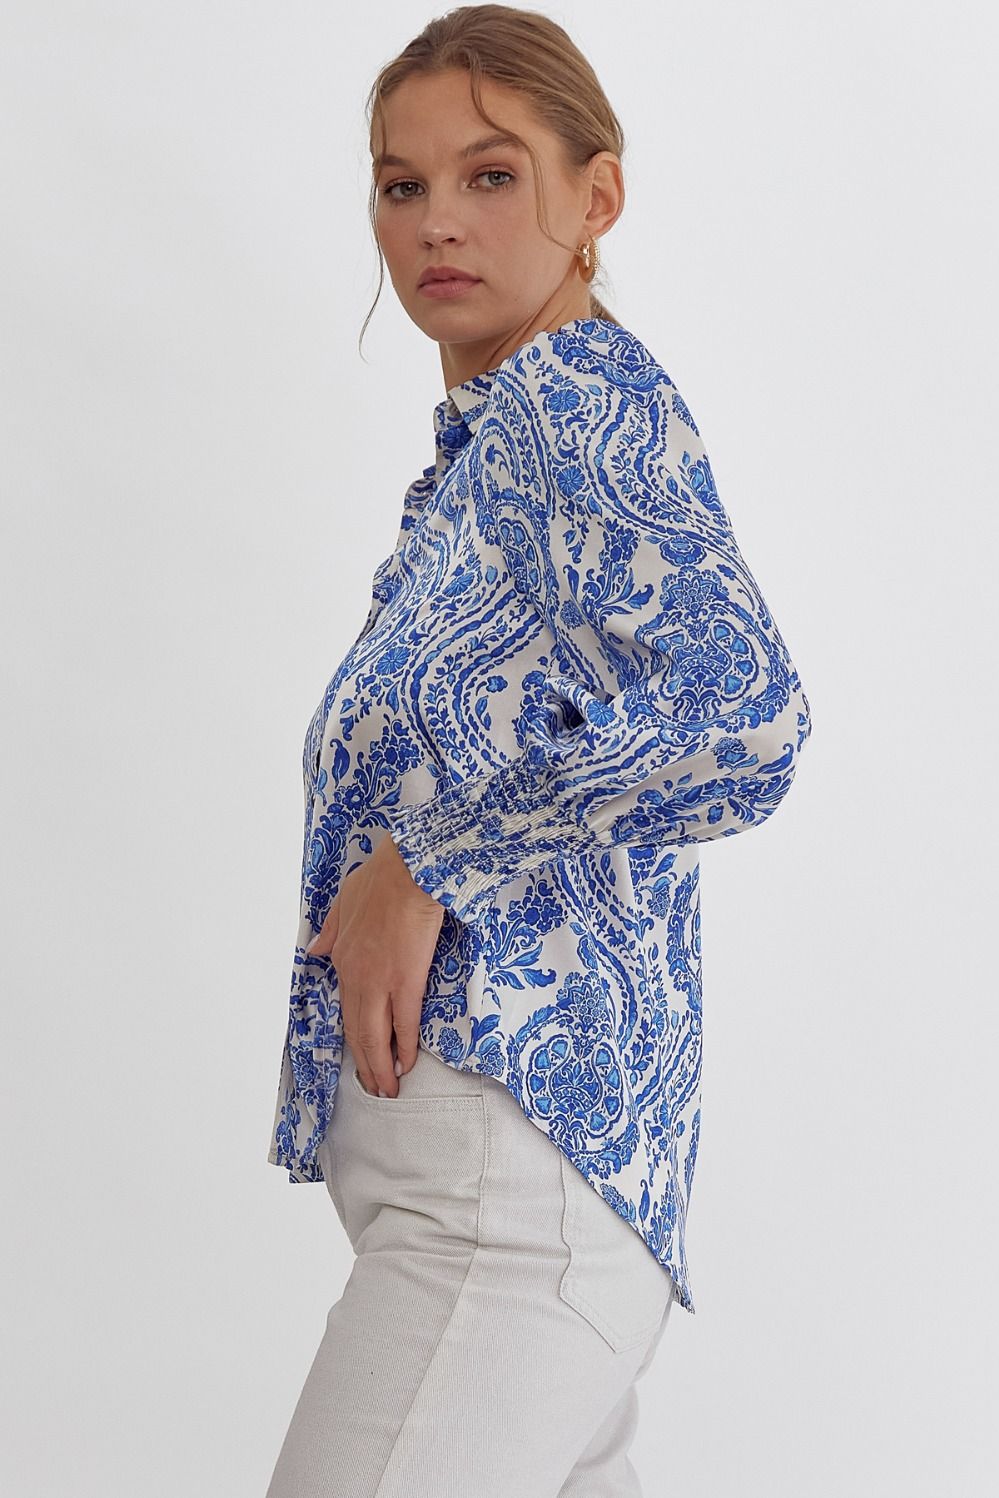 Paisley Print Collared Button Up Blouse